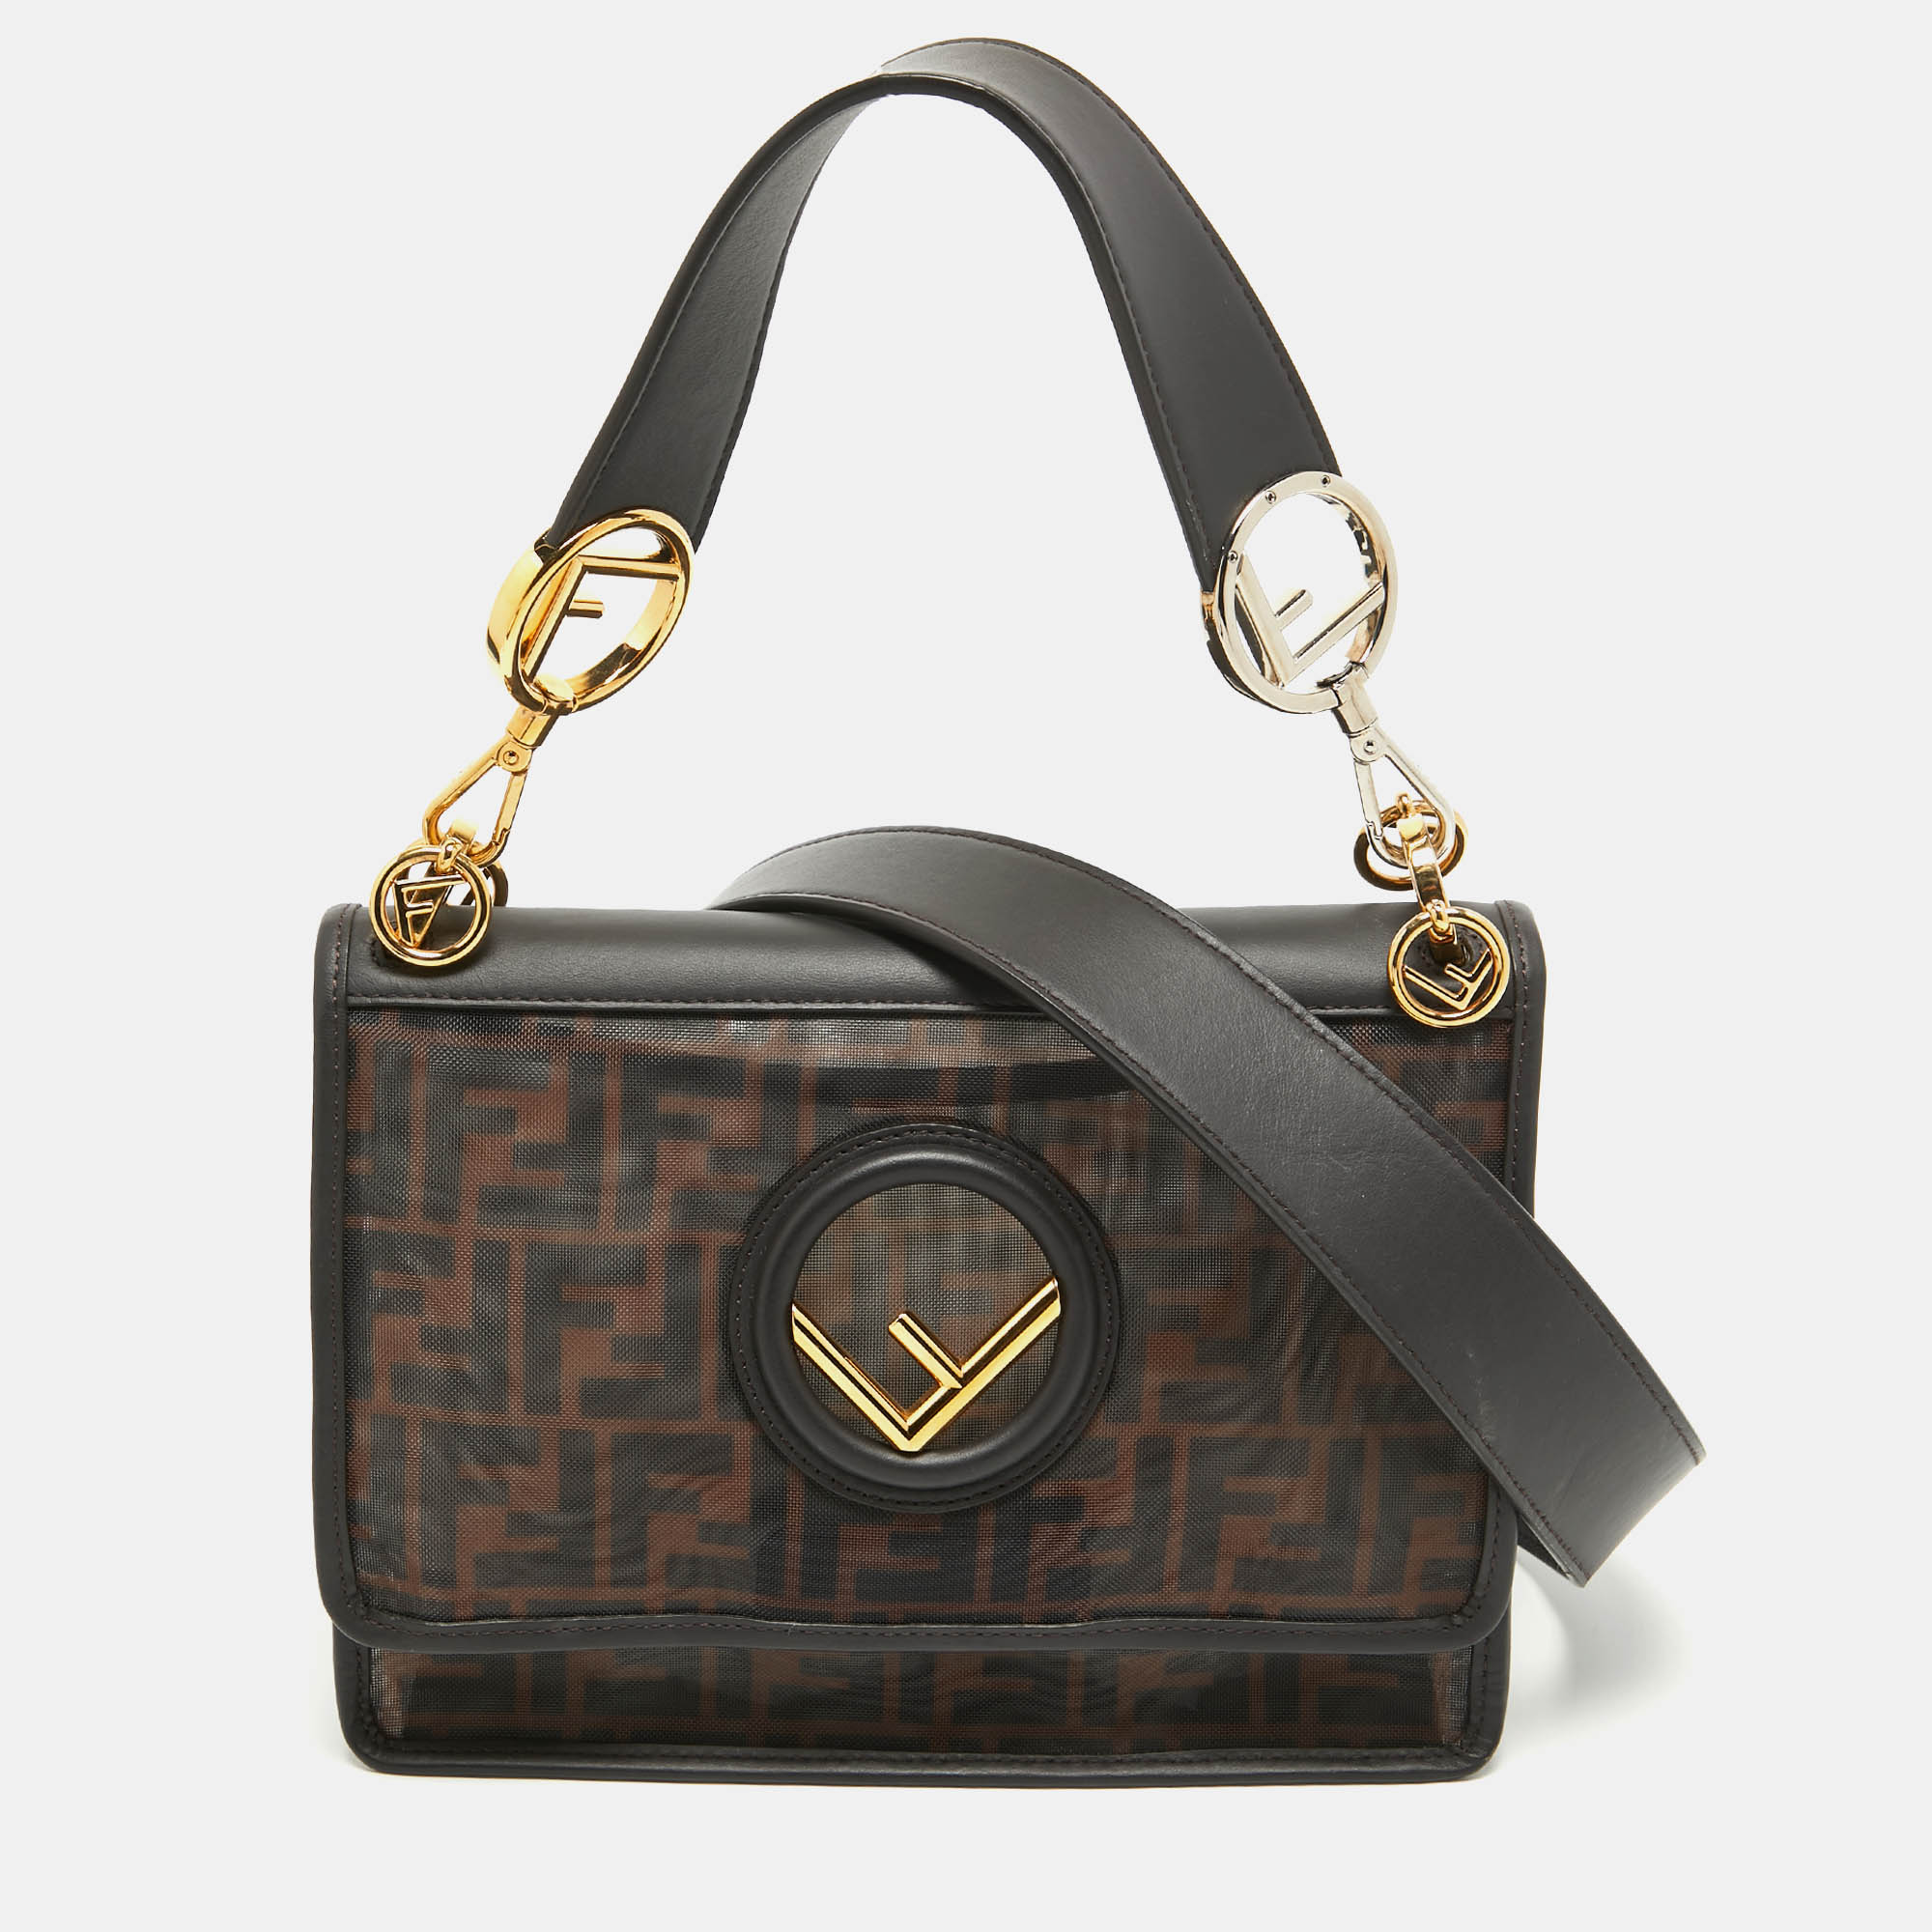 This Kan I shoulder bag from Fendi deserves a place in your luxury handbag collection. Accented with the slanted Fendi logo in two toned hardware on the exterior creates a subtle contrast. With a flap type closure and a spacious interior this bag provides great space for your personal items.